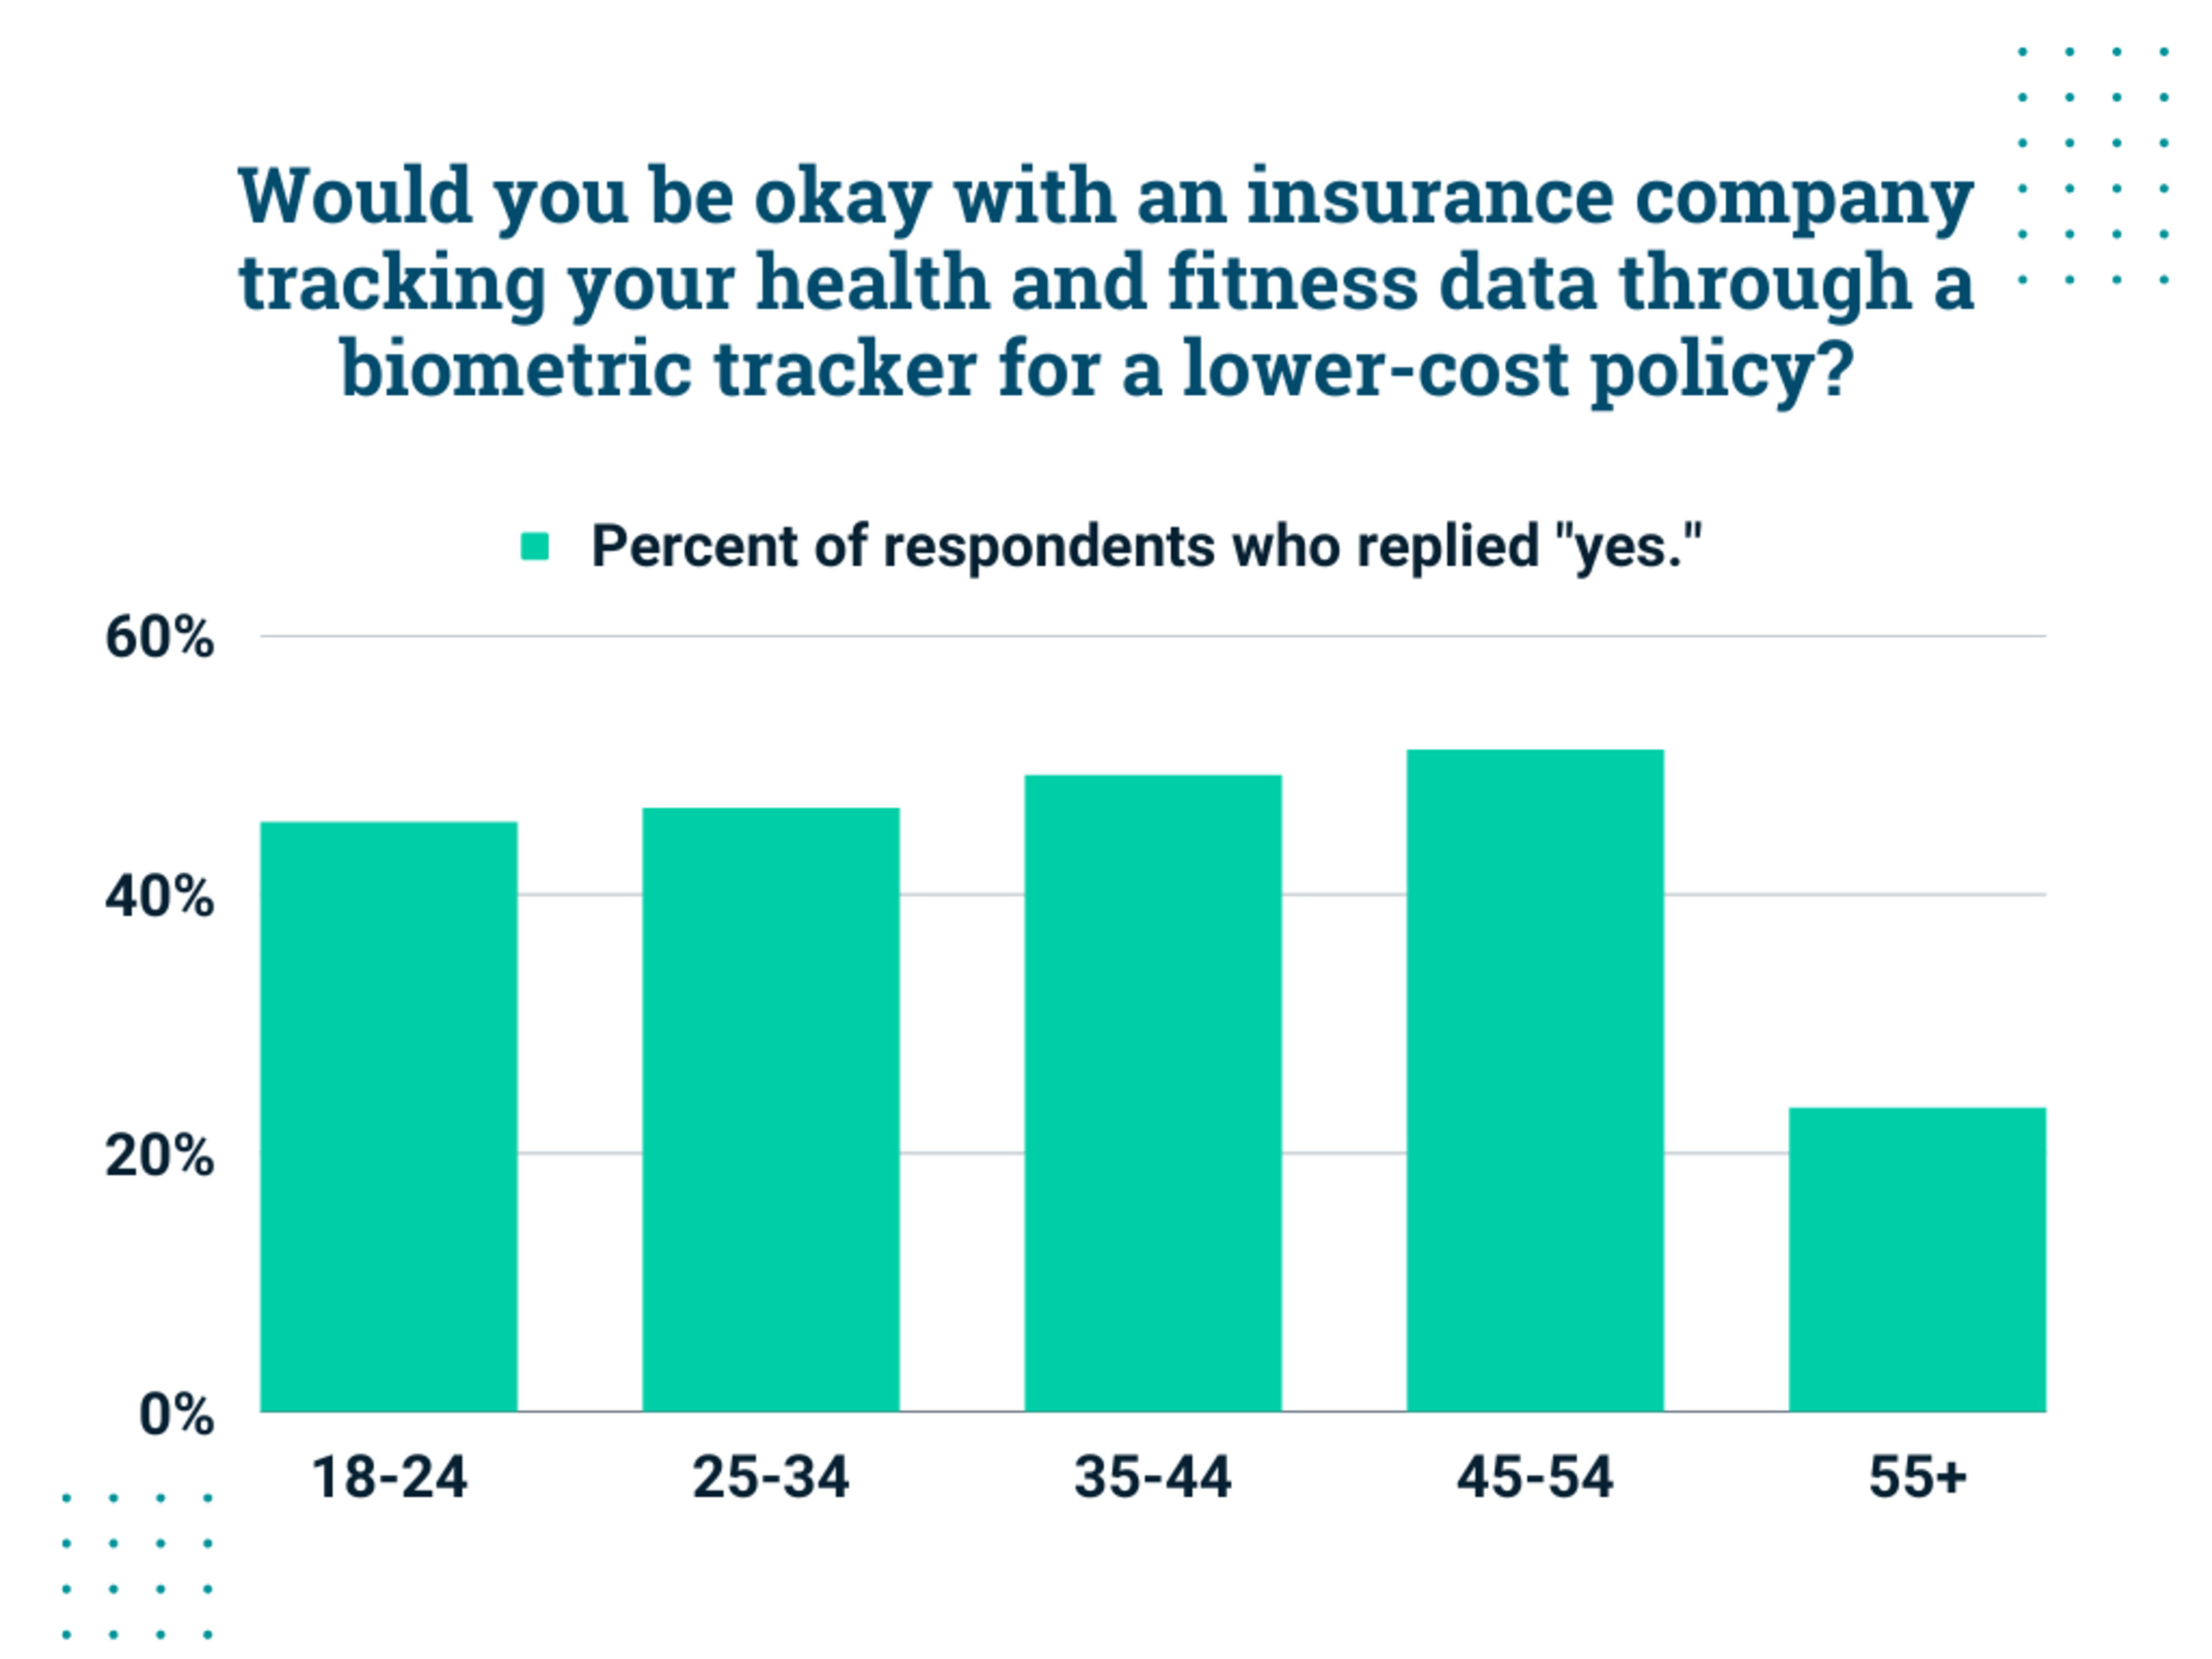 Would you be okay with an insurance company tracking your health and fitness data through a biometric tracker for a lower-cost policy? 